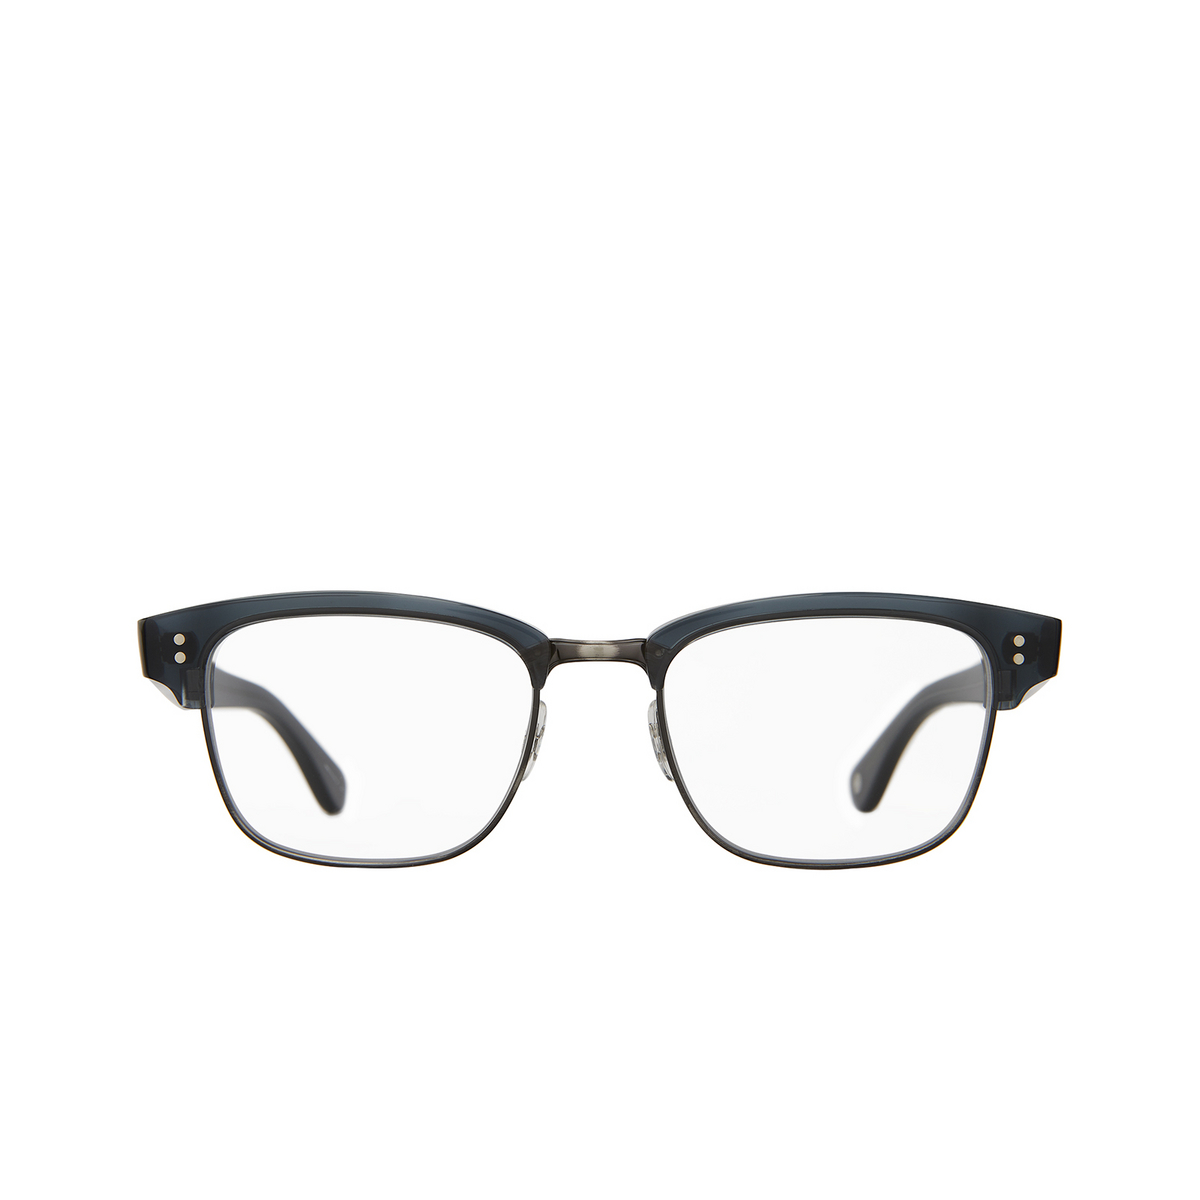 Garrett Leight GIBSON Eyeglasses NVY-PW Navy - Pewter - front view